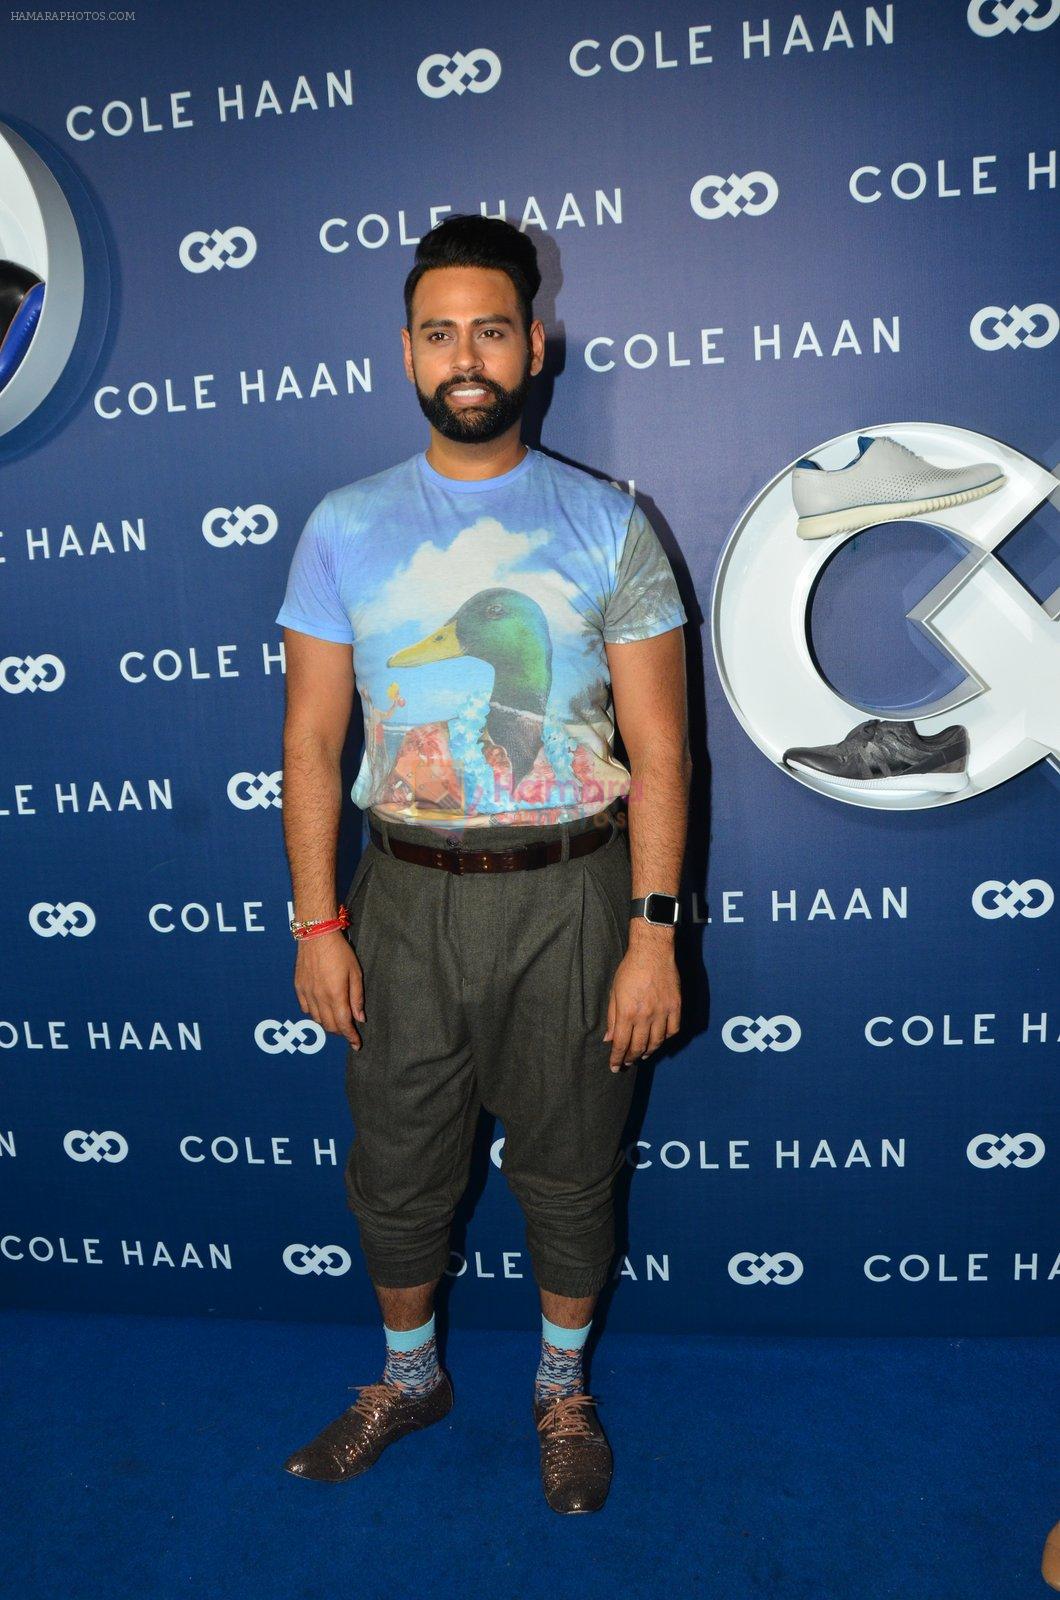 Andy at the launch of Cole Haan in India on 26th Aug 2016